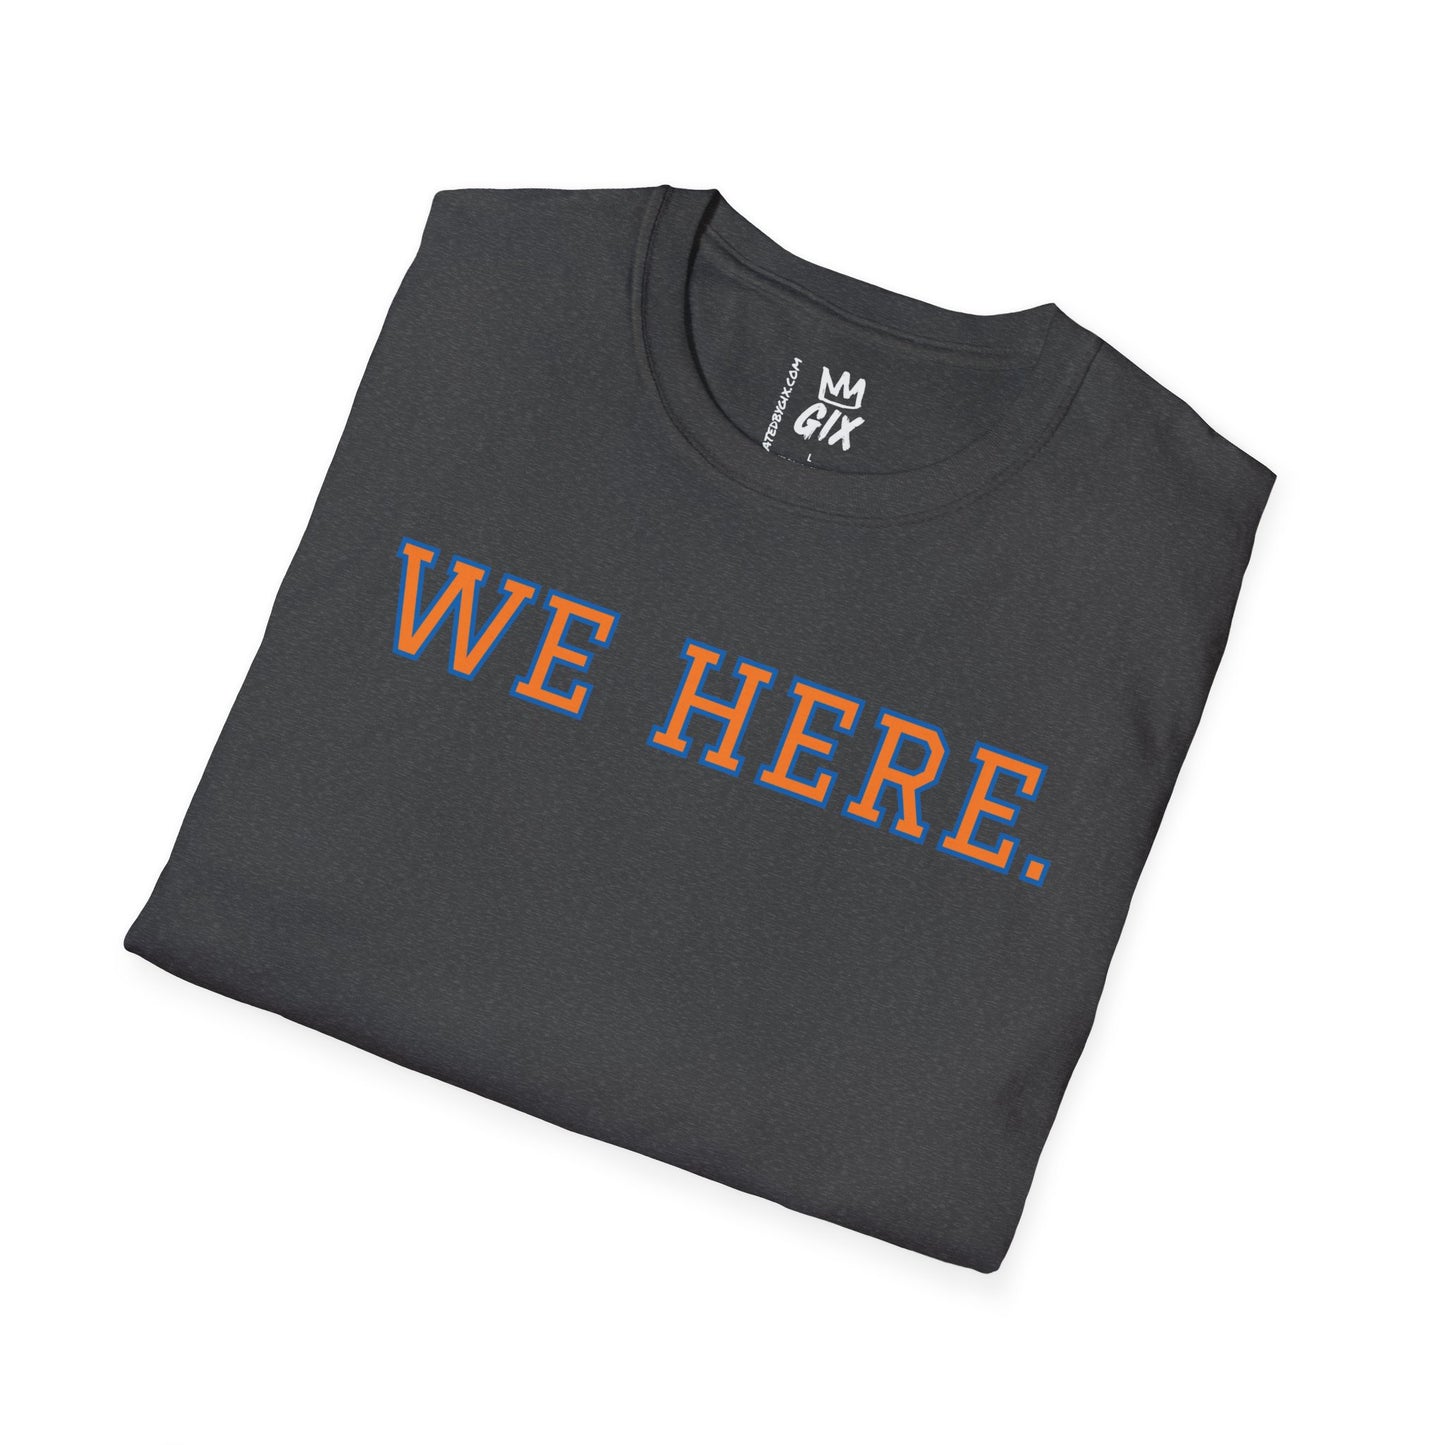 We Here - Unisex T-Shirt - Soft Cotton Blend, Classic Fit for Ultimate Comfort